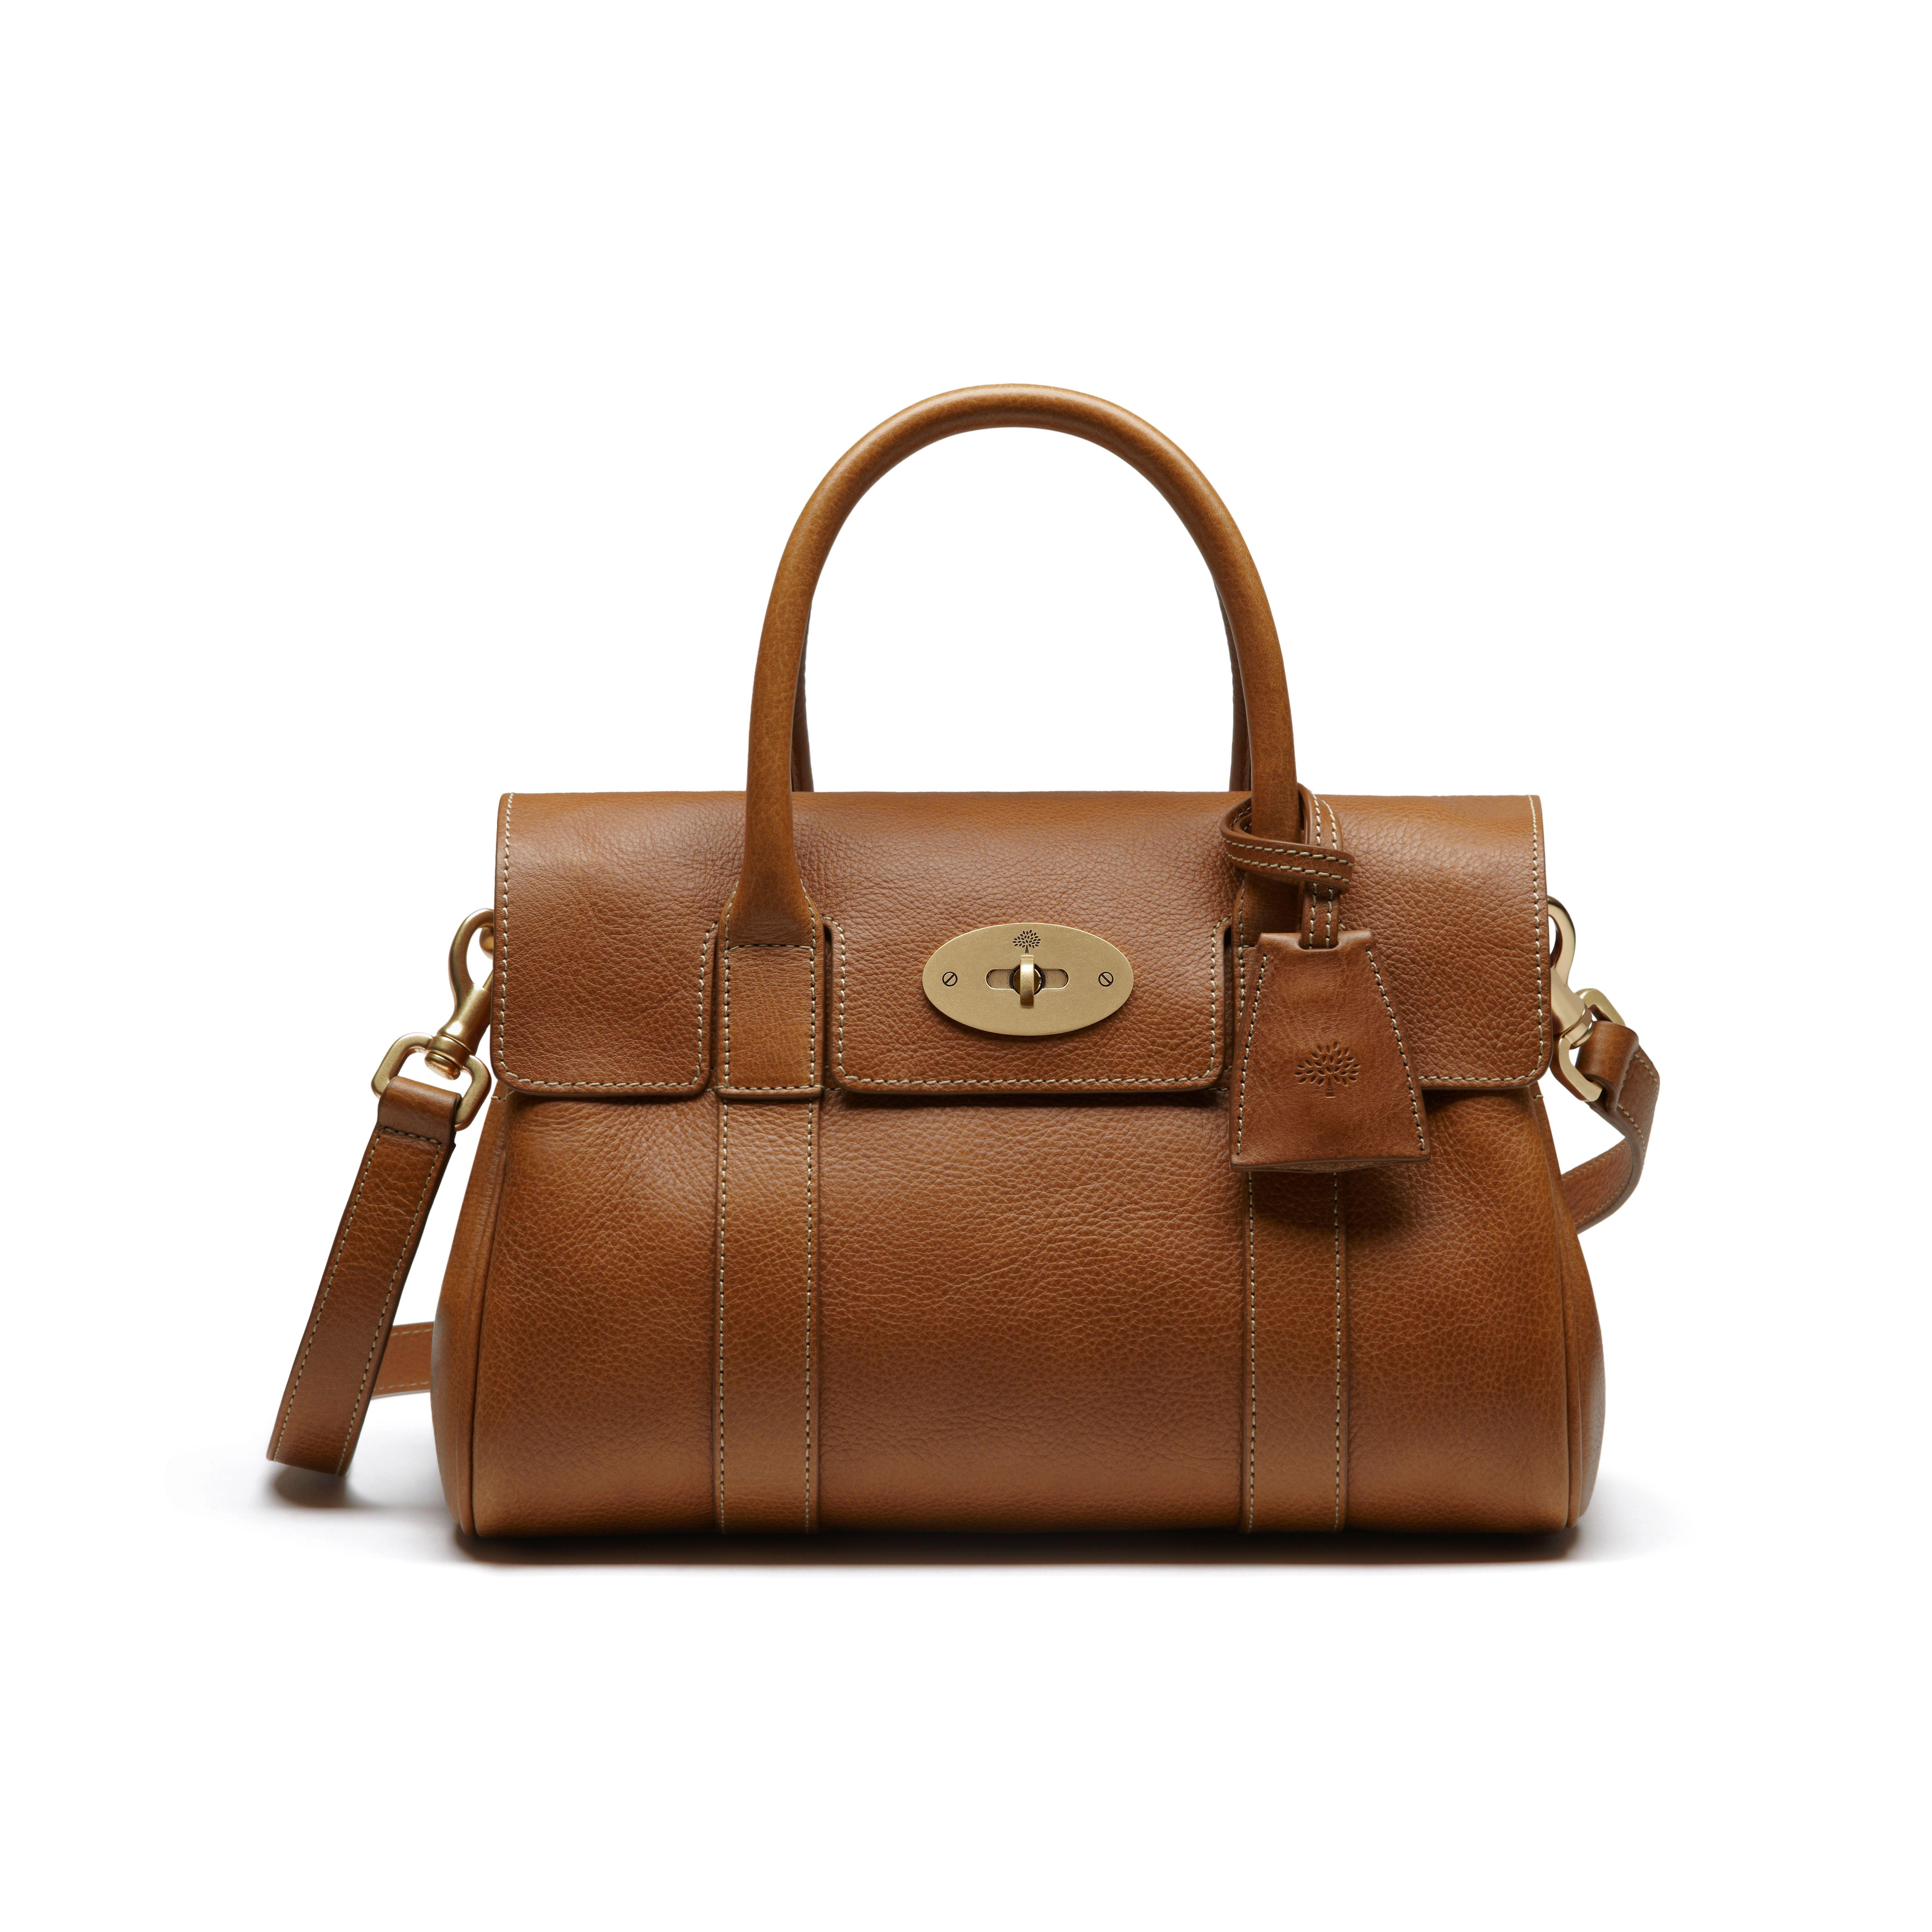 Lyst - Mulberry Small Bayswater Leather Satchel in Brown